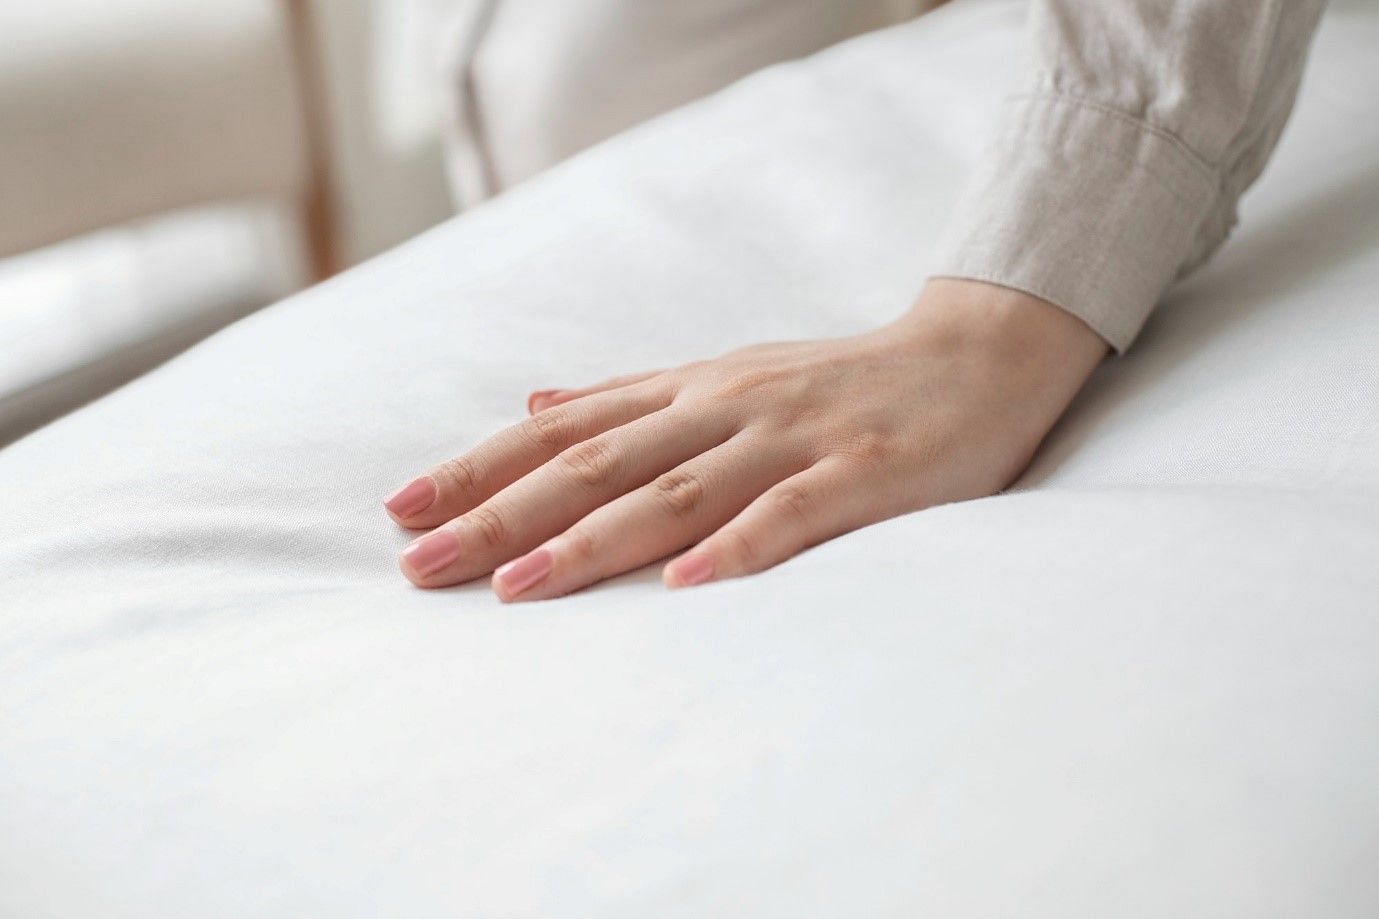 Moisture-absorbing bedsheets are best for hot sleepers (Image by Rawpixel.com on Freepik)